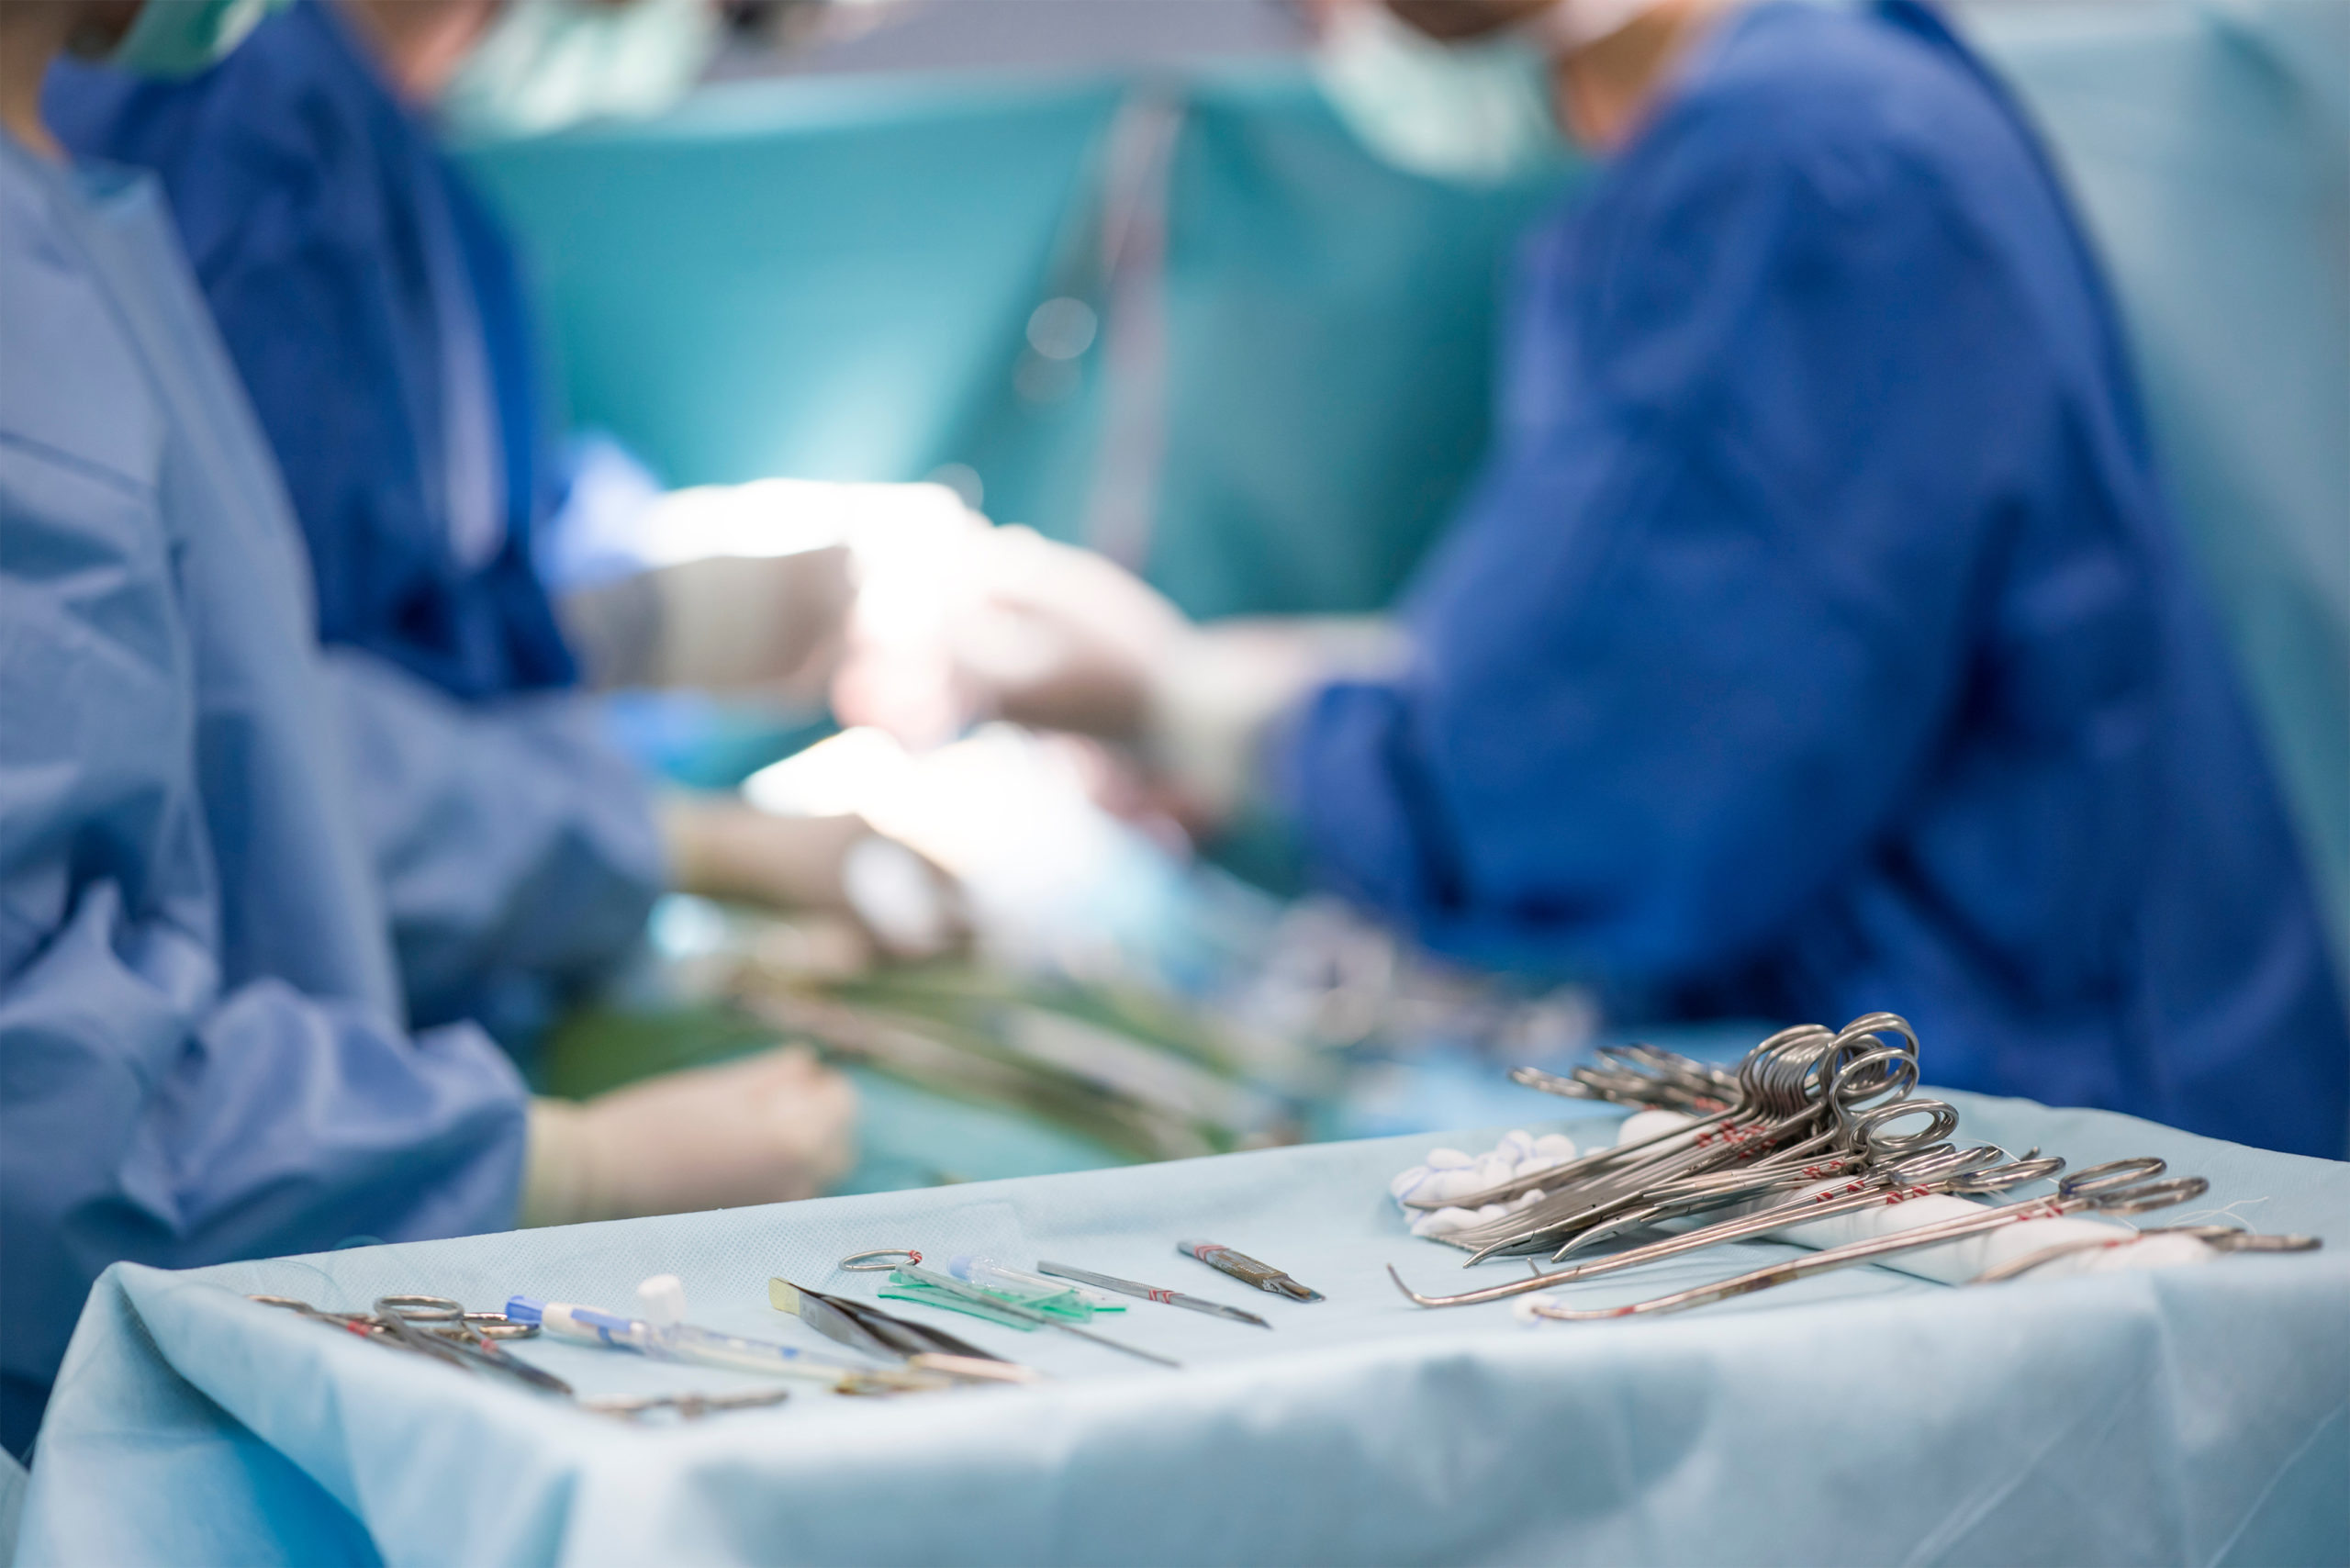 surgical instruments on the table during surgery